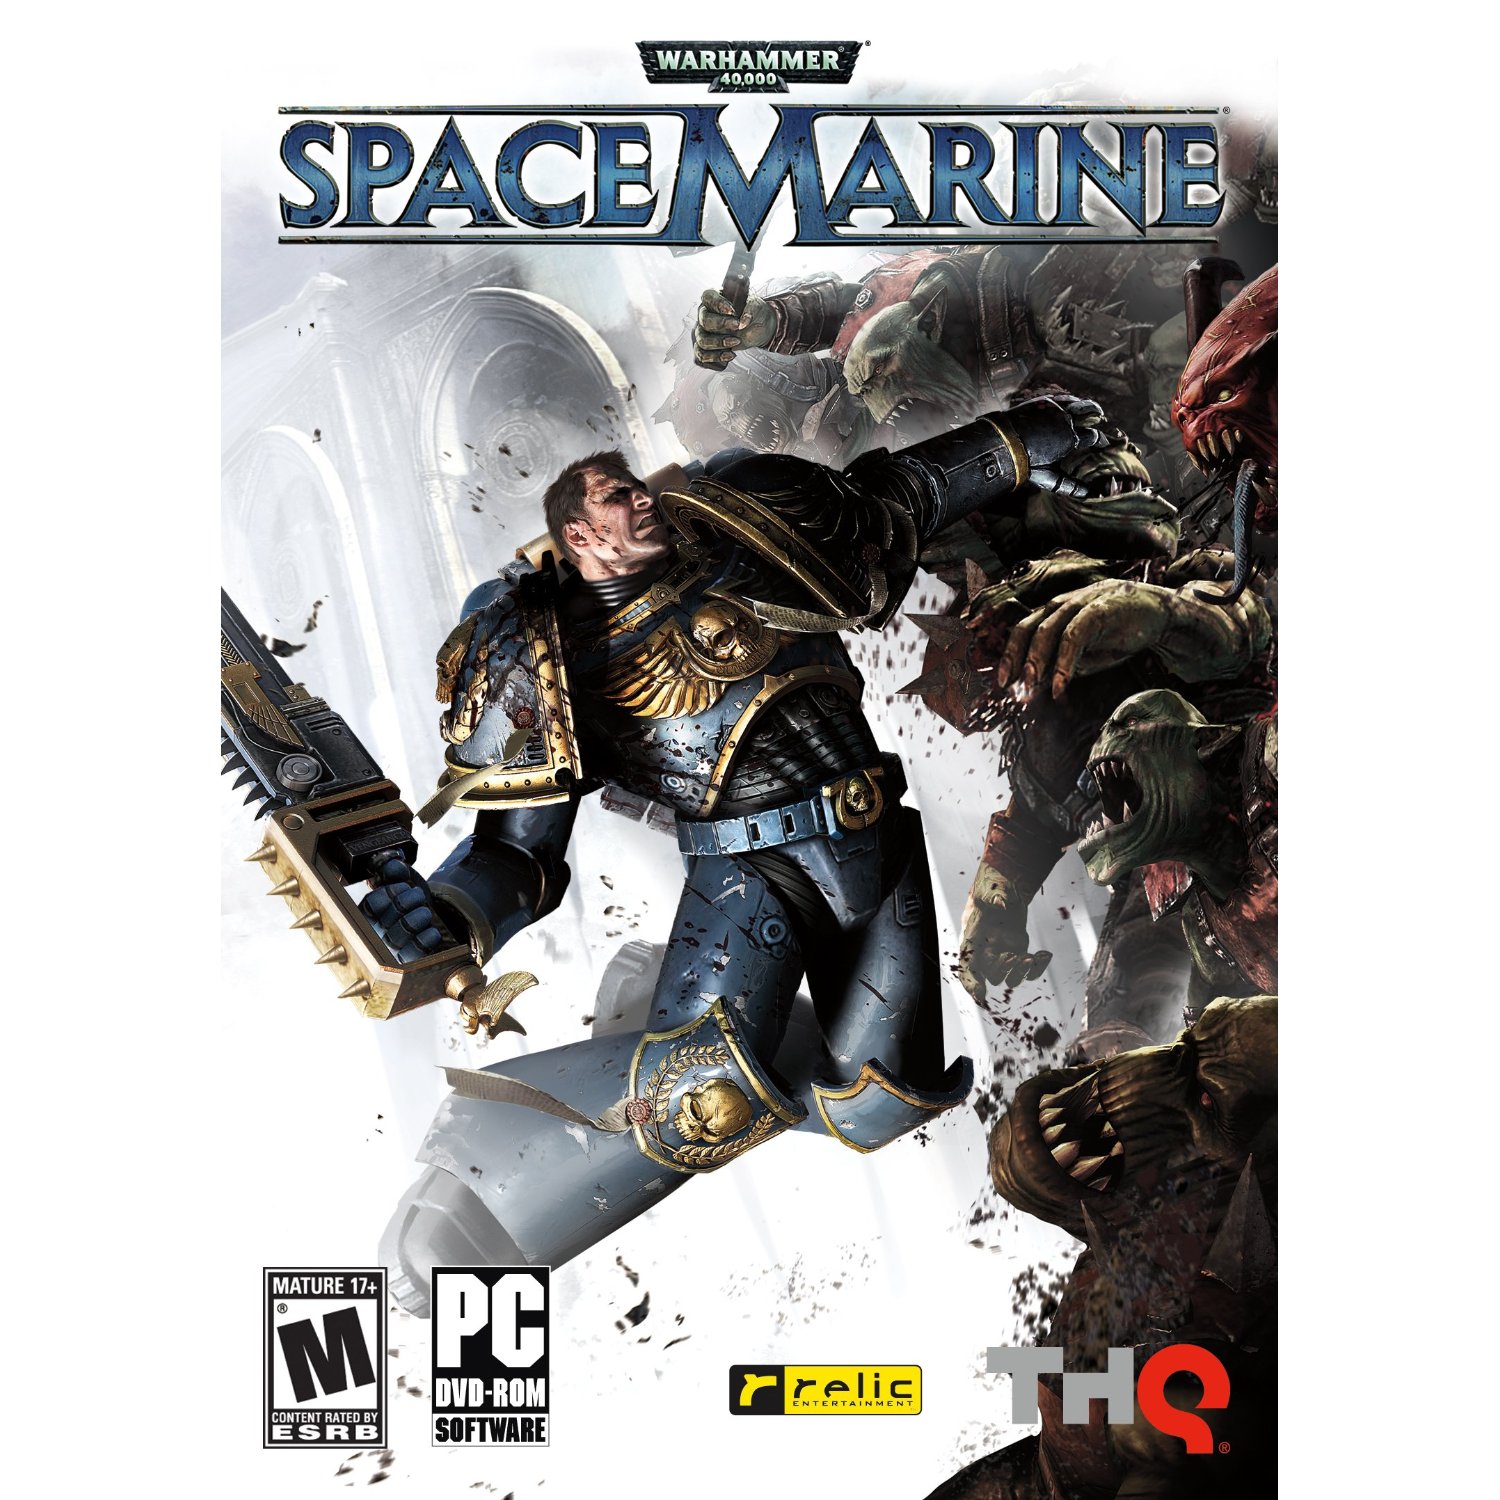 http://thetechjournal.com/wp-content/uploads/images/1108/1313991886-warhammer-40000-space-marine--game-review-1.jpg